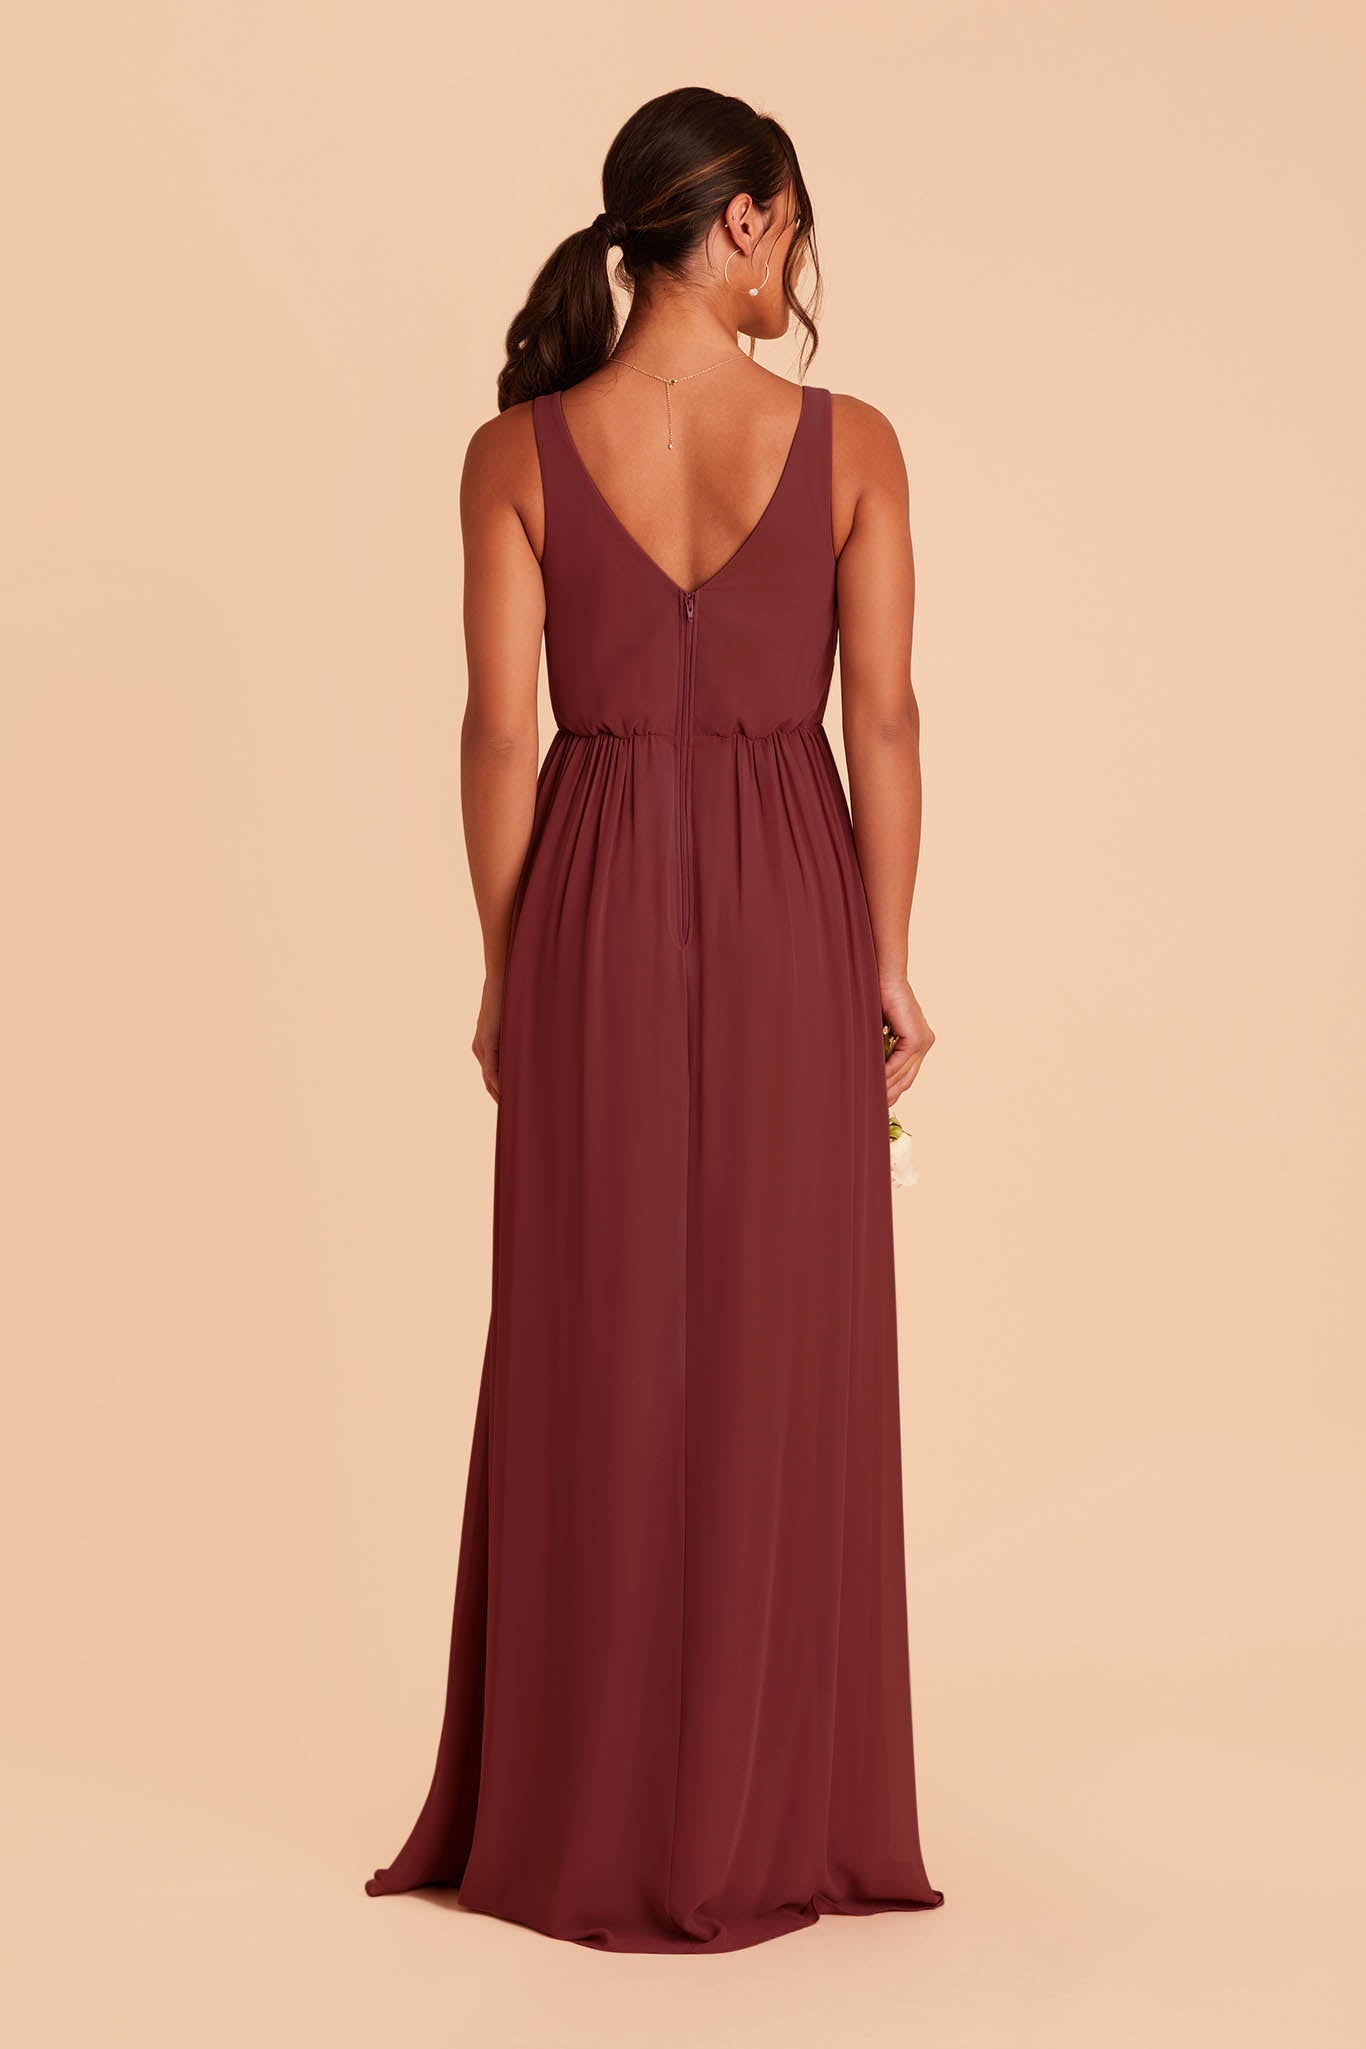 Rosewood Laurie Empire Dress by Birdy Grey